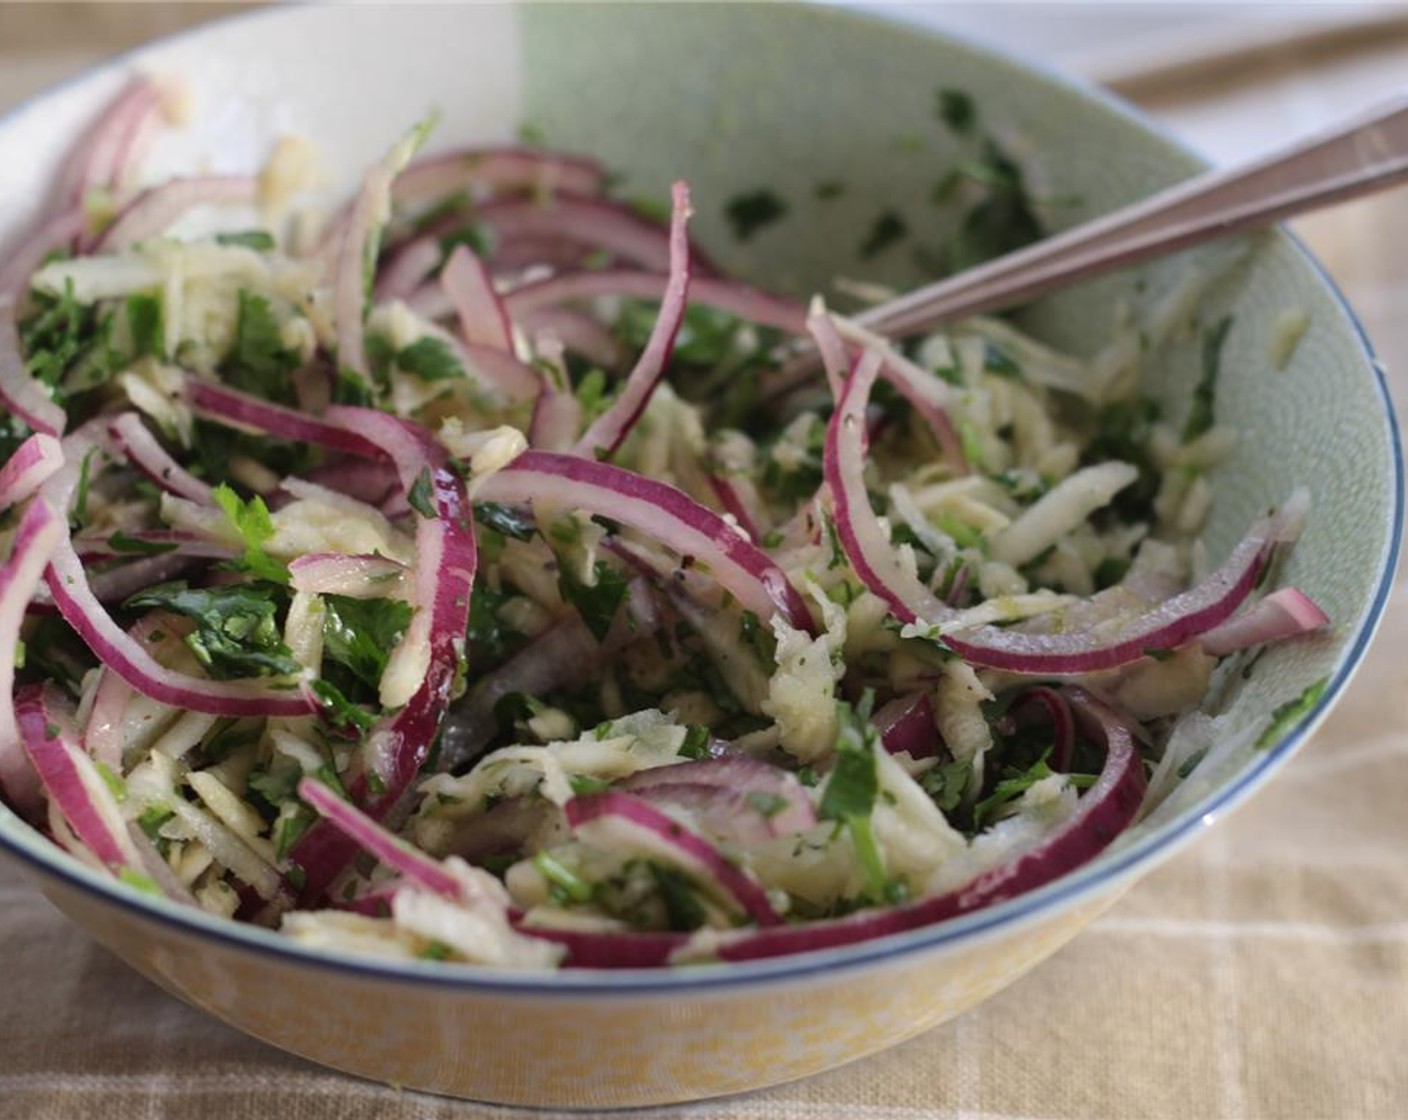 step 9 Combine the grated kohlrabi, sliced red onion, and cilantro with the key lime juice dressing. Season to taste.